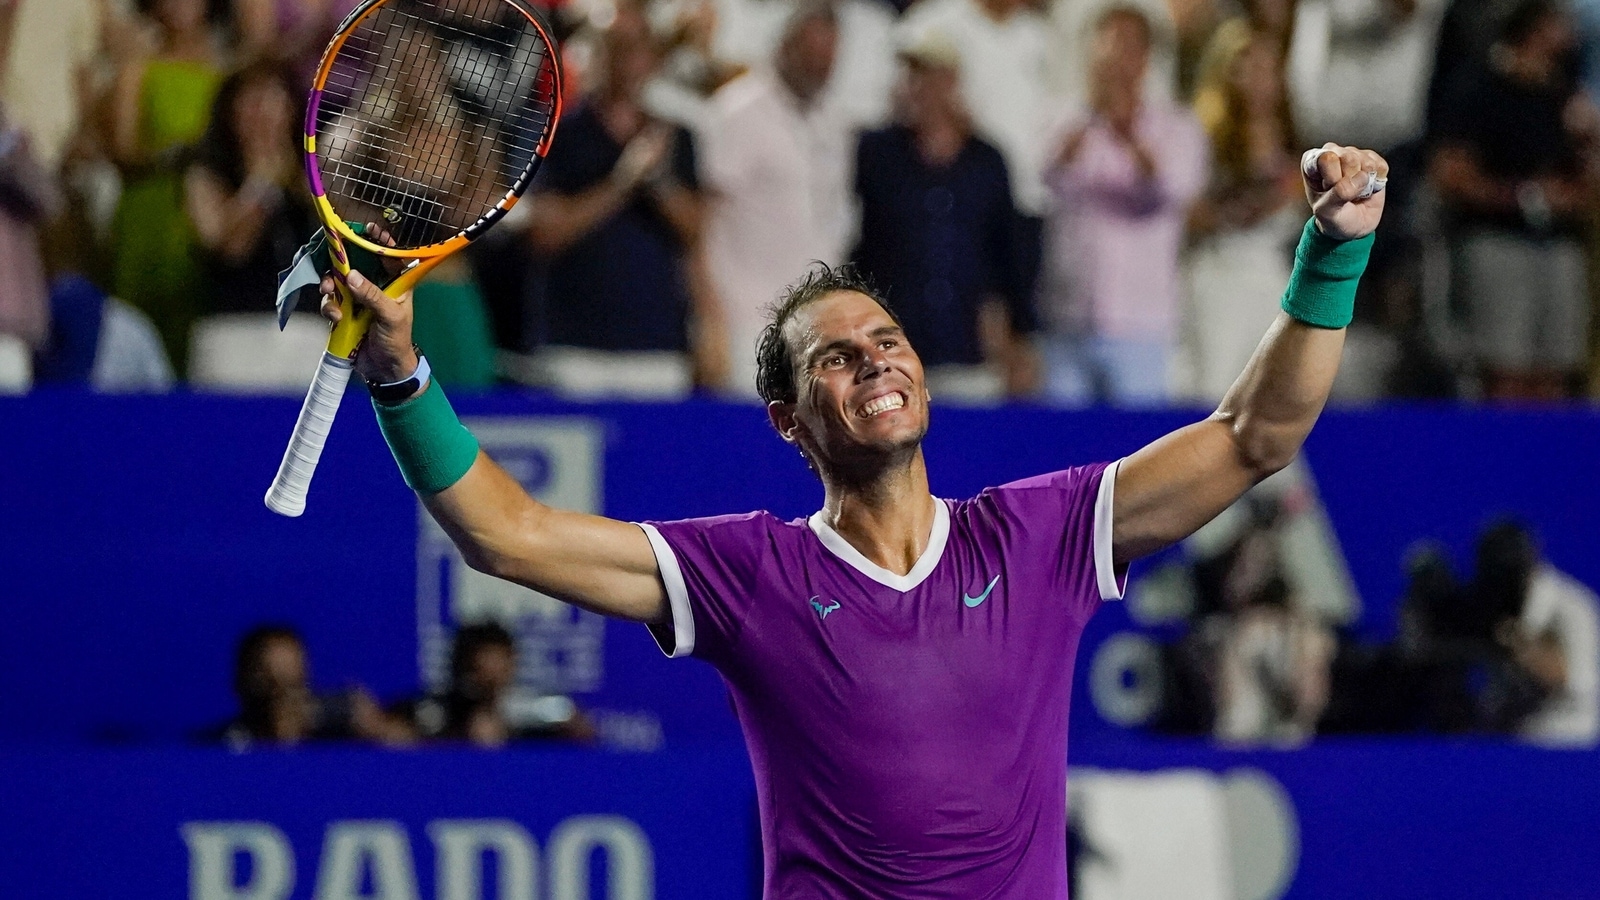 Nadal takes down Medvedev to set up Norrie date in Acapulco final Tennis News